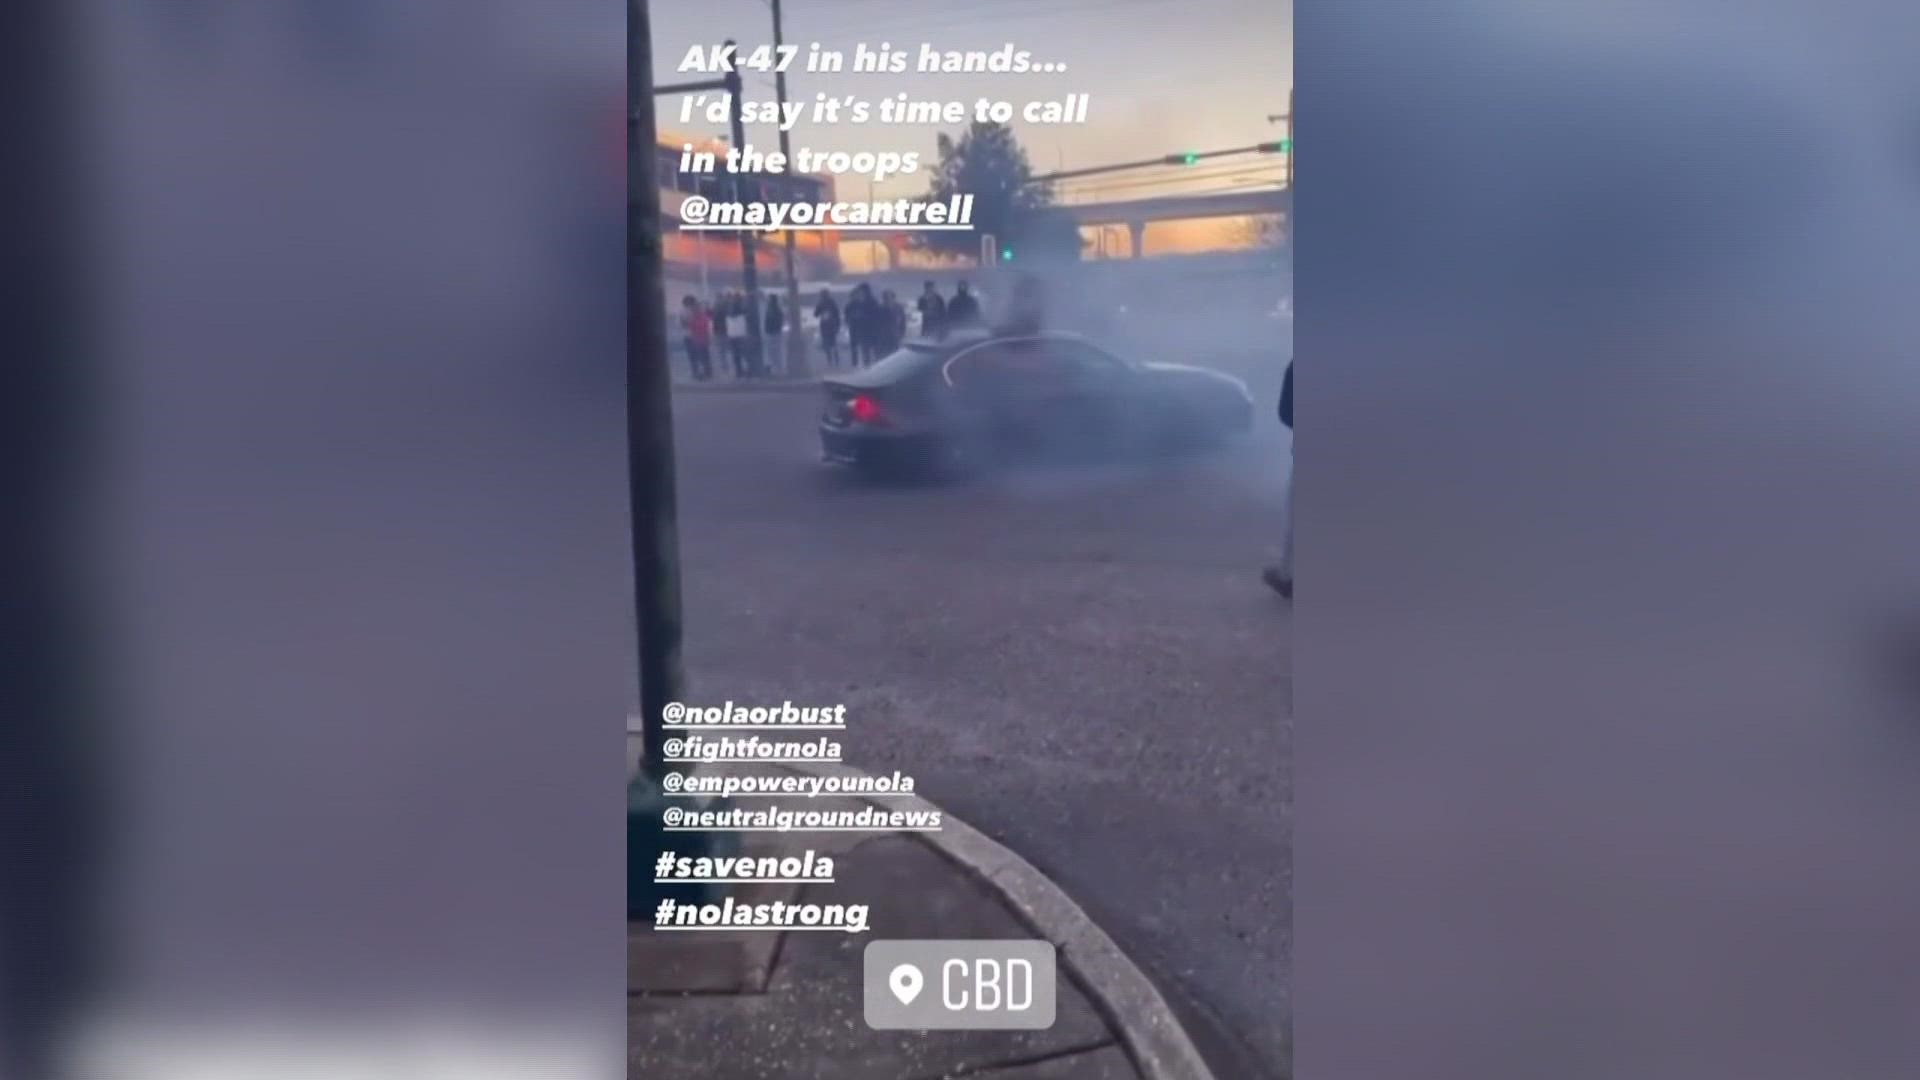 After a video of cars doing donuts in the streets of New Orleans, community leaders are calling for help as the young subjects continue to wreak havoc on the city.